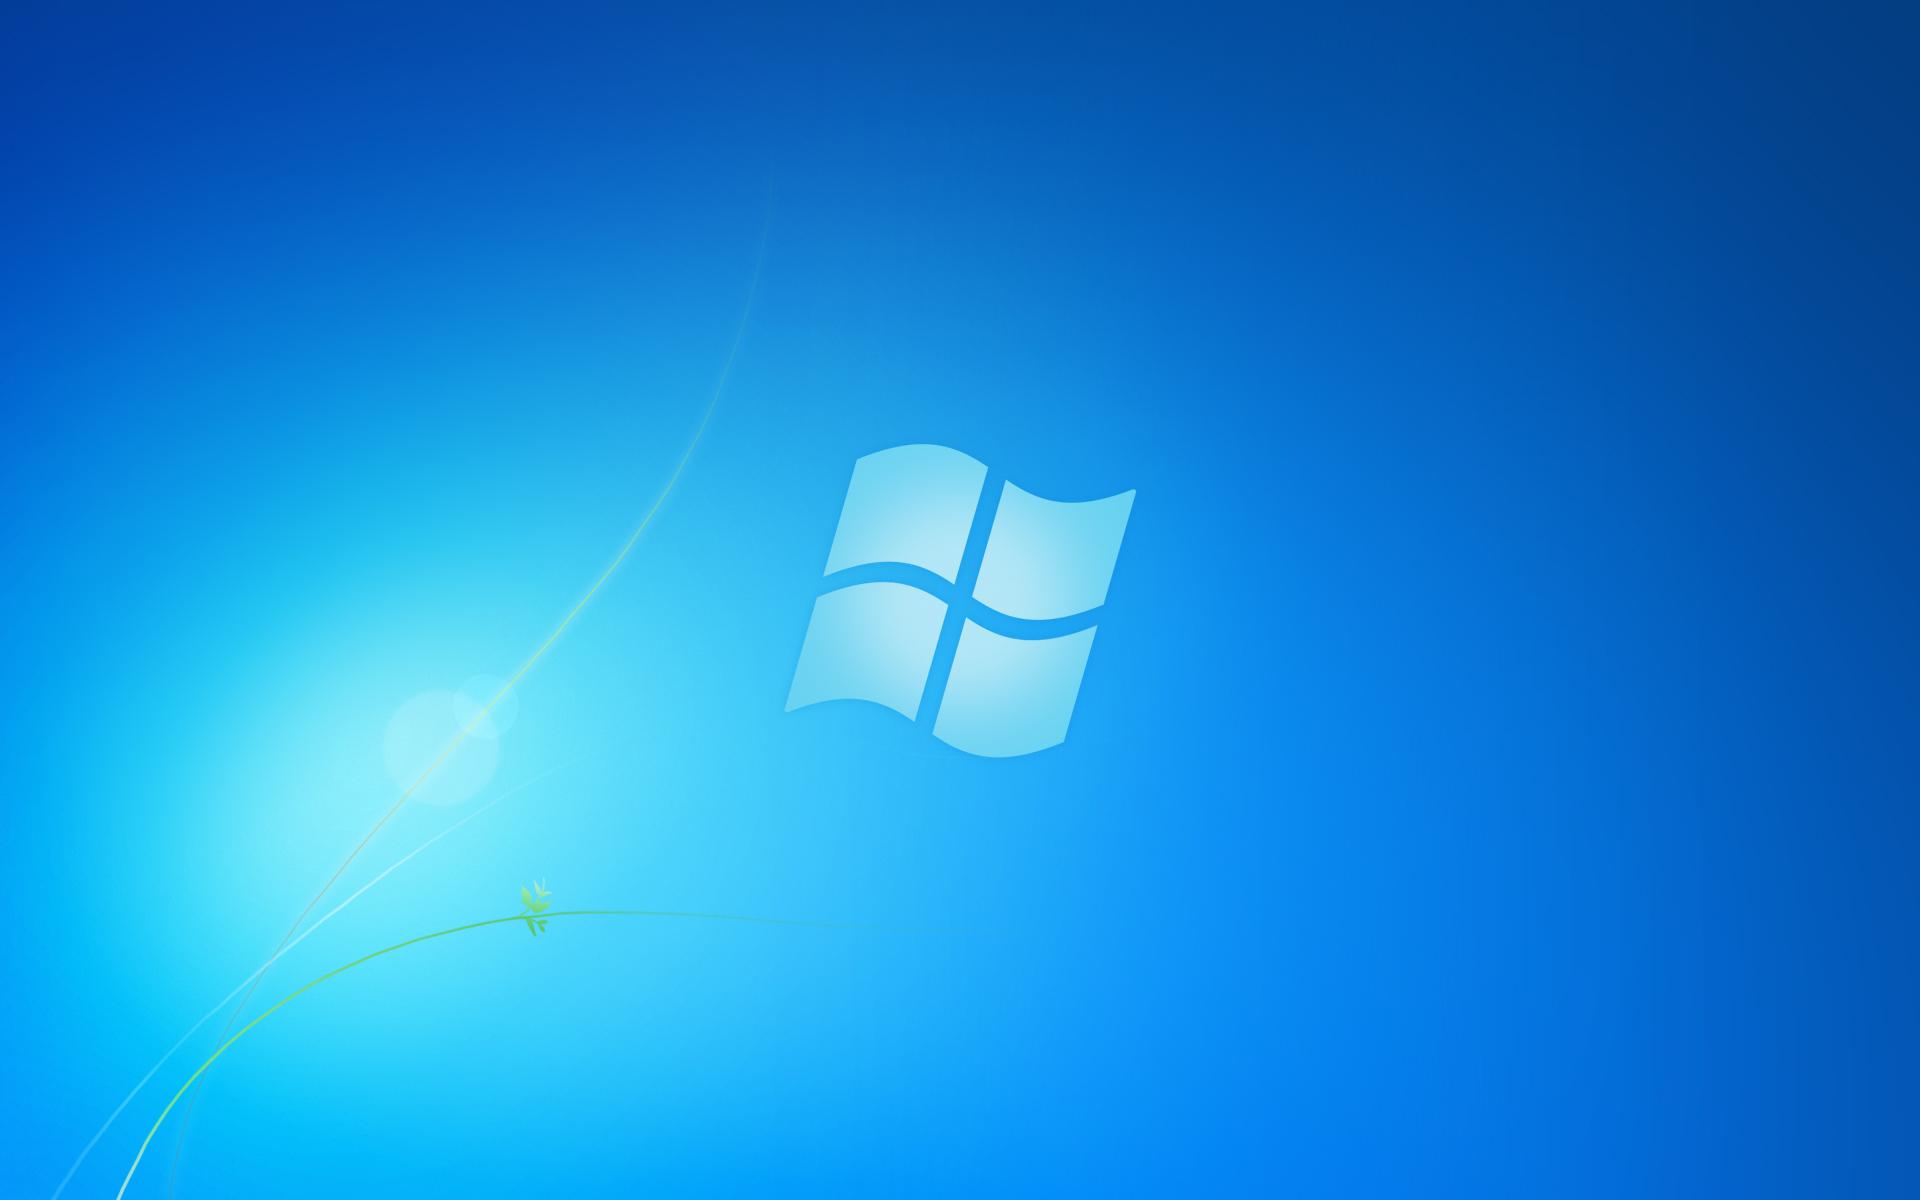 Free download Cool windows 7 free wallpaper Wallpapers HD Wallpapers ...